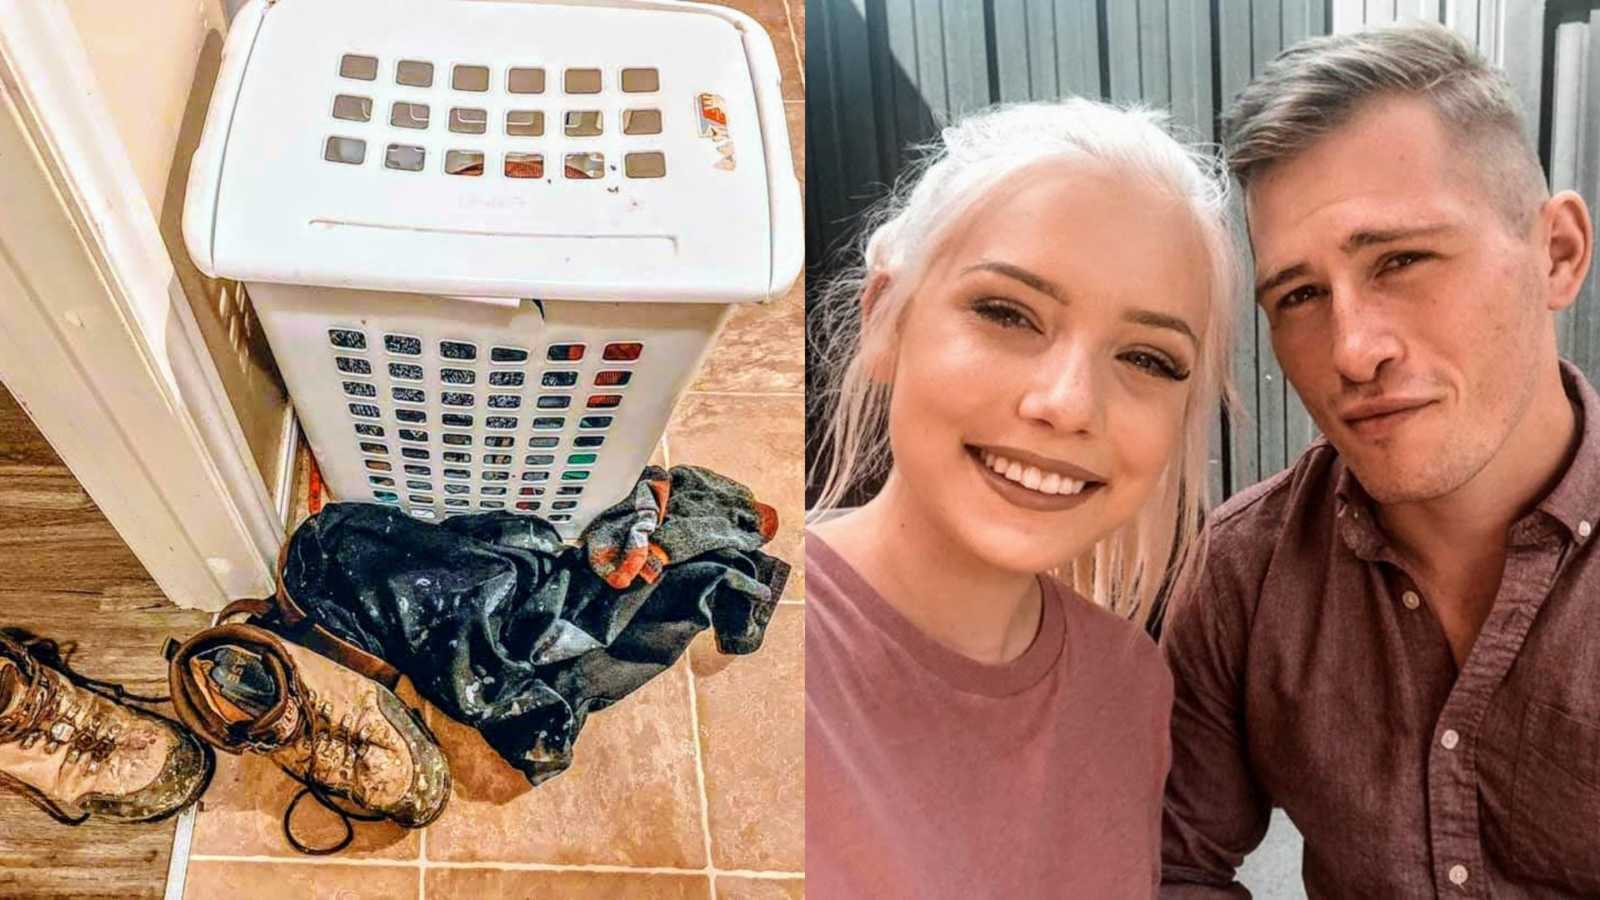 Left: dirty clothes on floor, Right: husband and wife in selfie